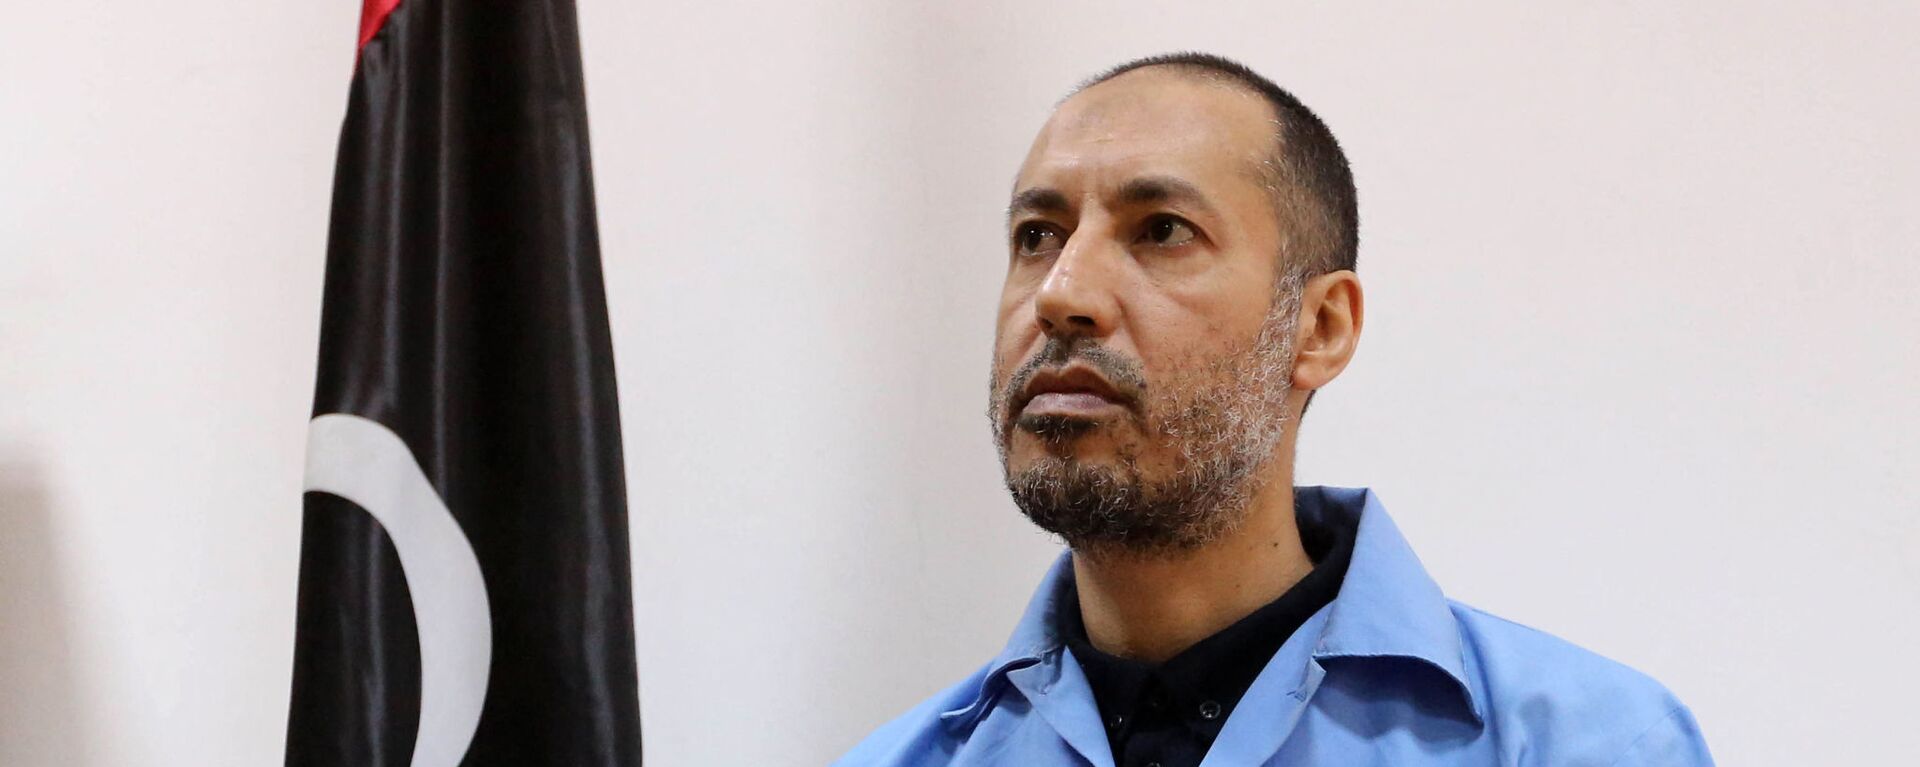 Saadi Kadhafi, the son of slain Libyan dictator Moamer Kadhafi, sits dressed in prison blues waiting before trial in a courthouse in the Libyan capital Tripoli on March 13, 2016 - Sputnik International, 1920, 05.09.2021